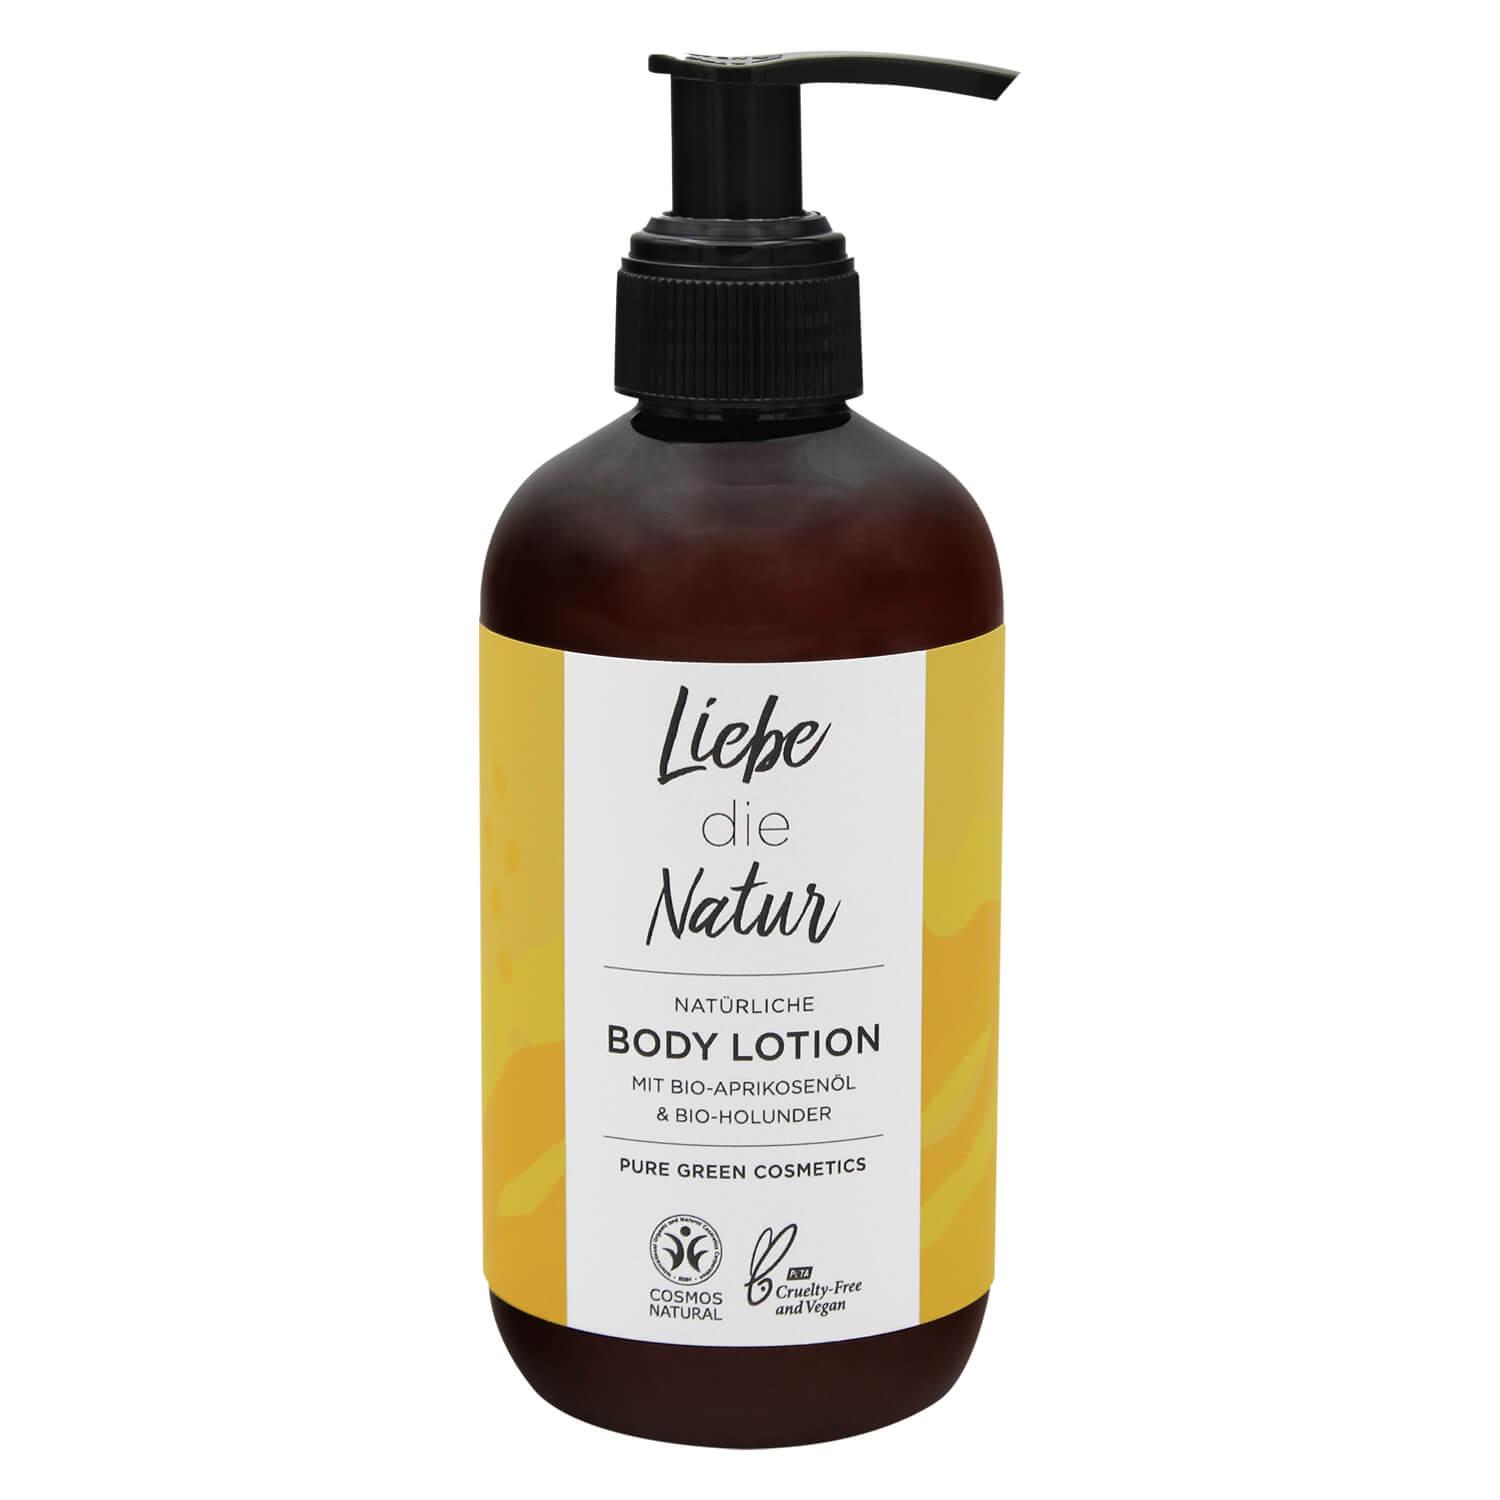 Liebe die Natur - Natural Apricot Body Lotion